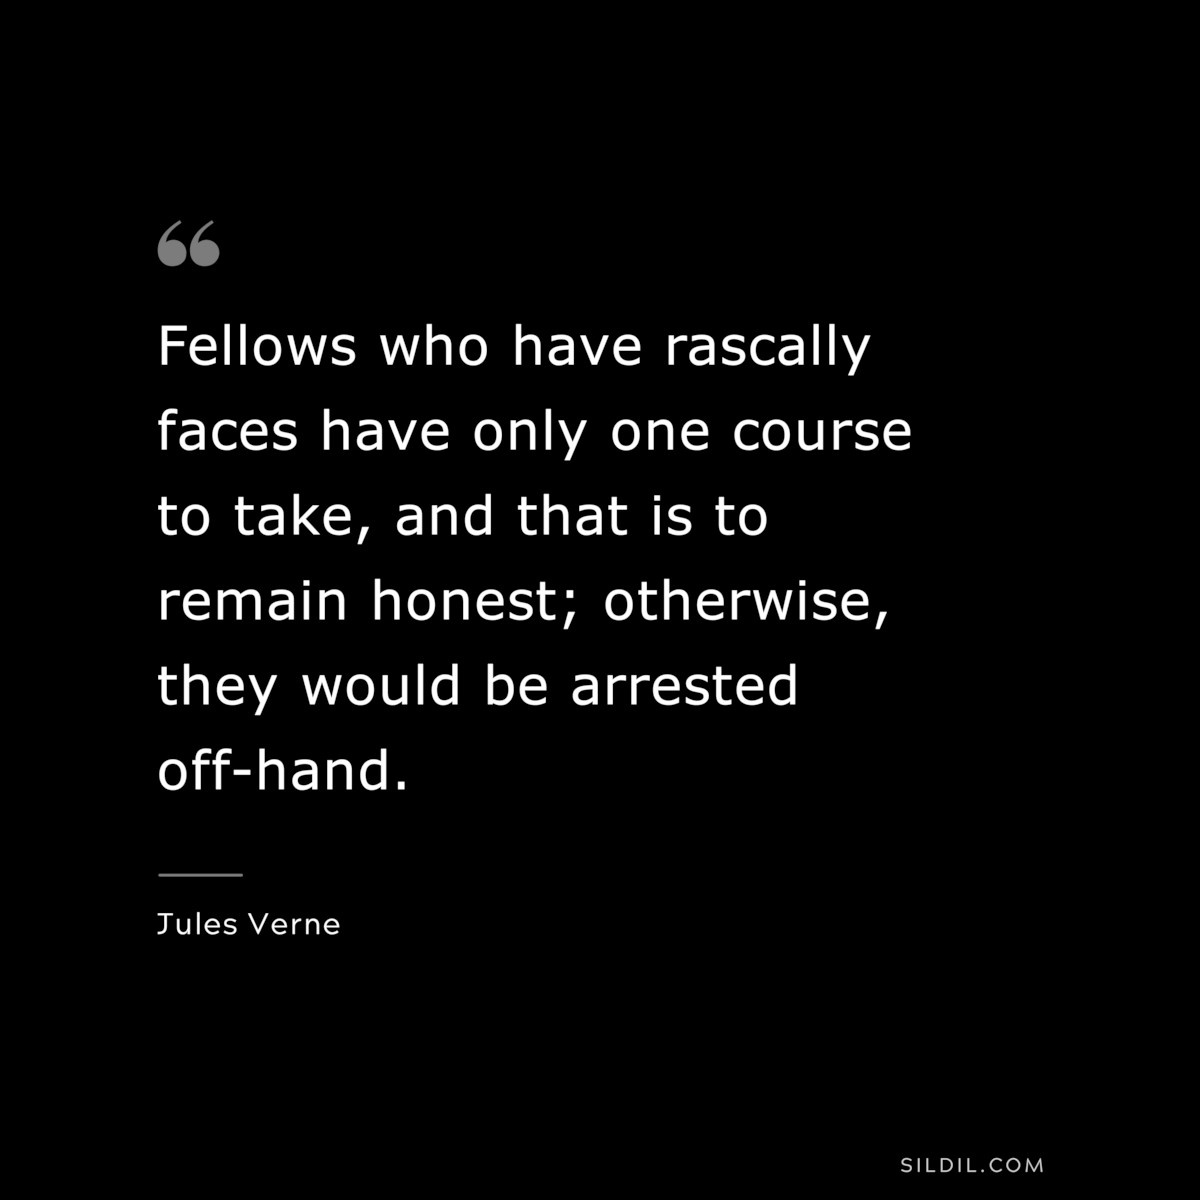 Fellows who have rascally faces have only one course to take, and that is to remain honest; otherwise, they would be arrested off-hand.